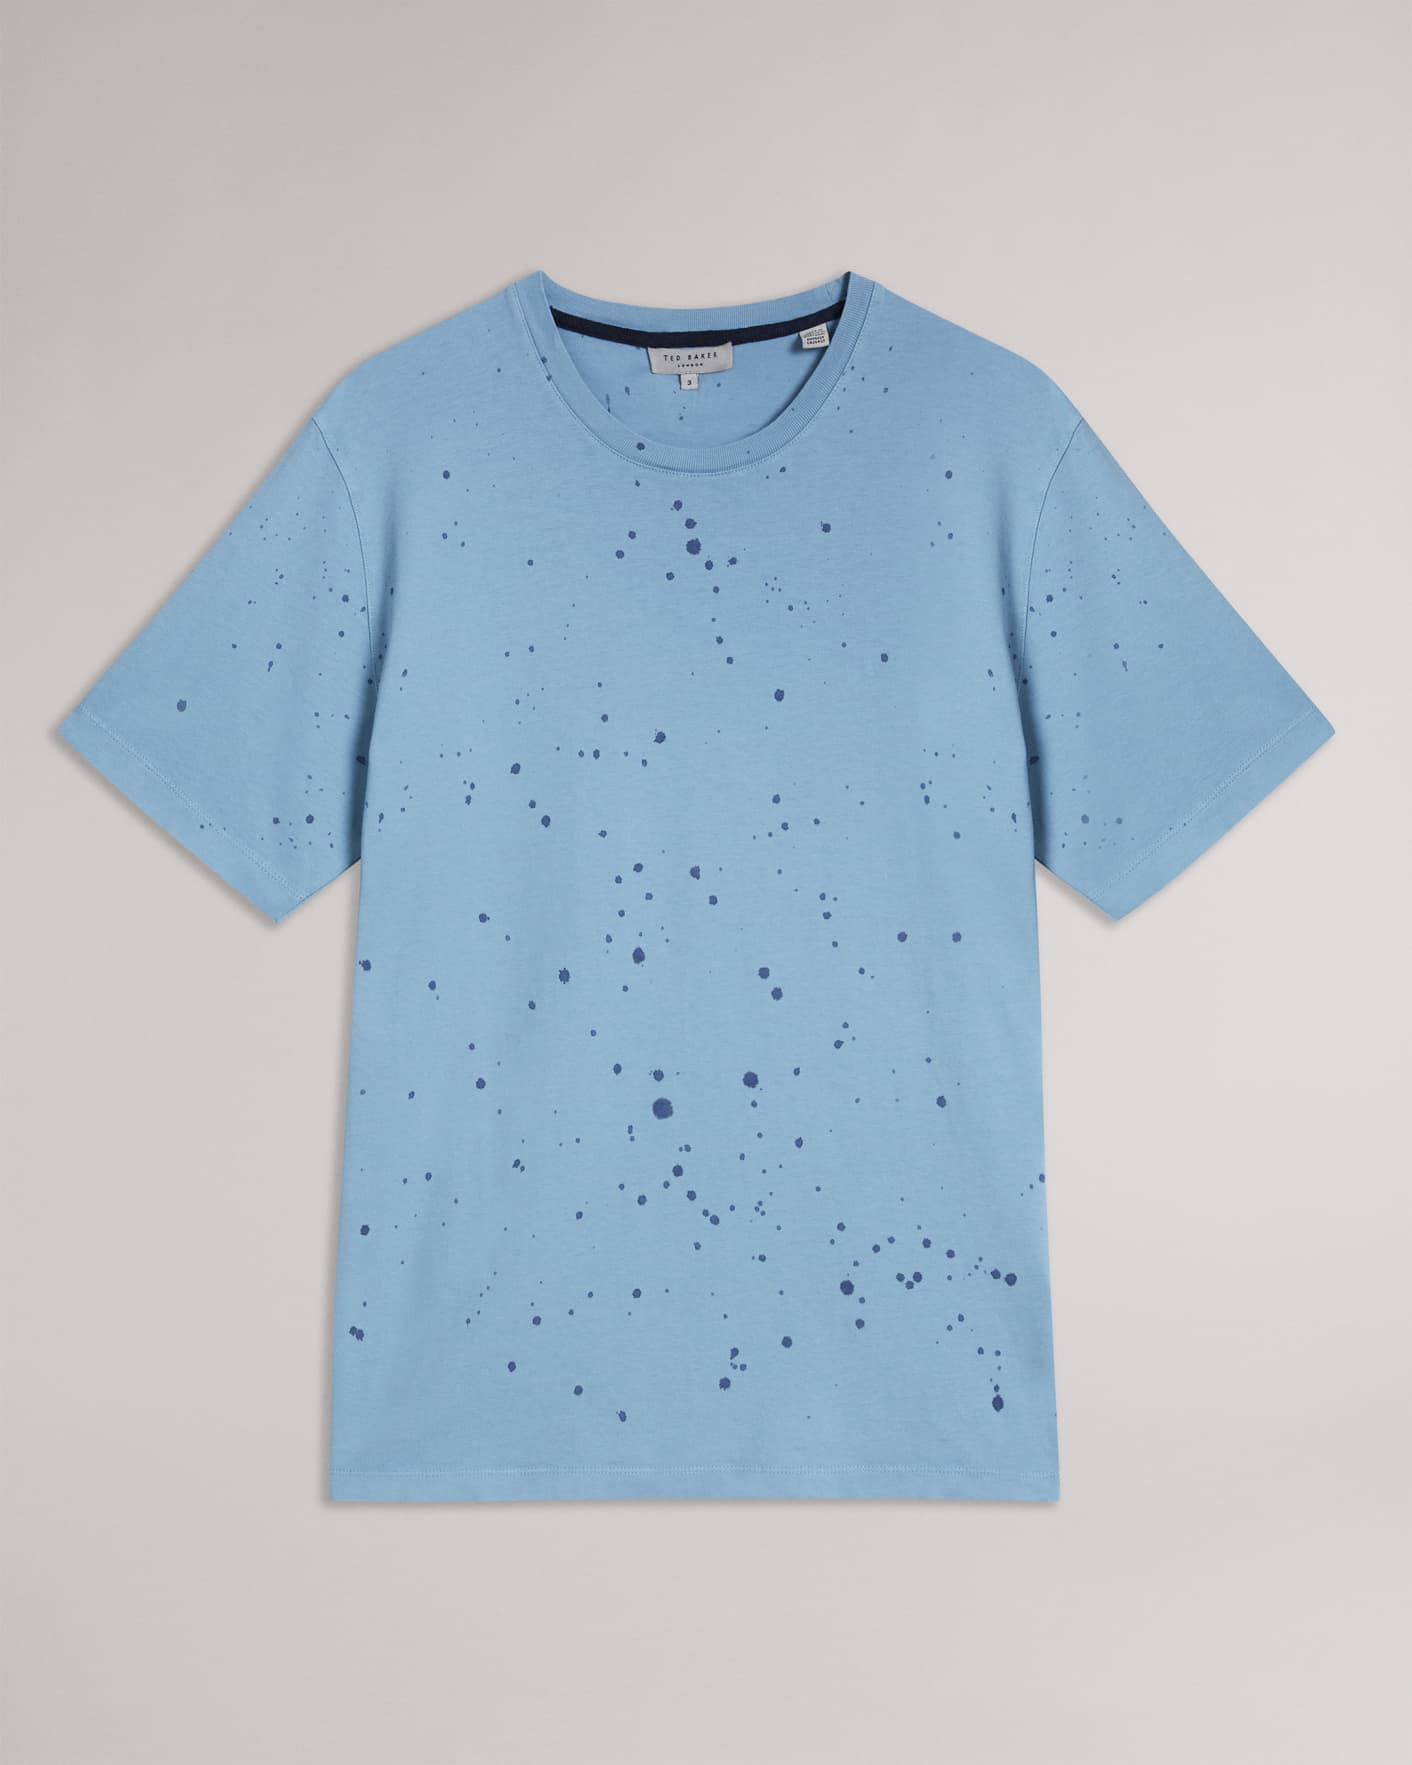 Blue Spray Dyed T-Shirt Ted Baker